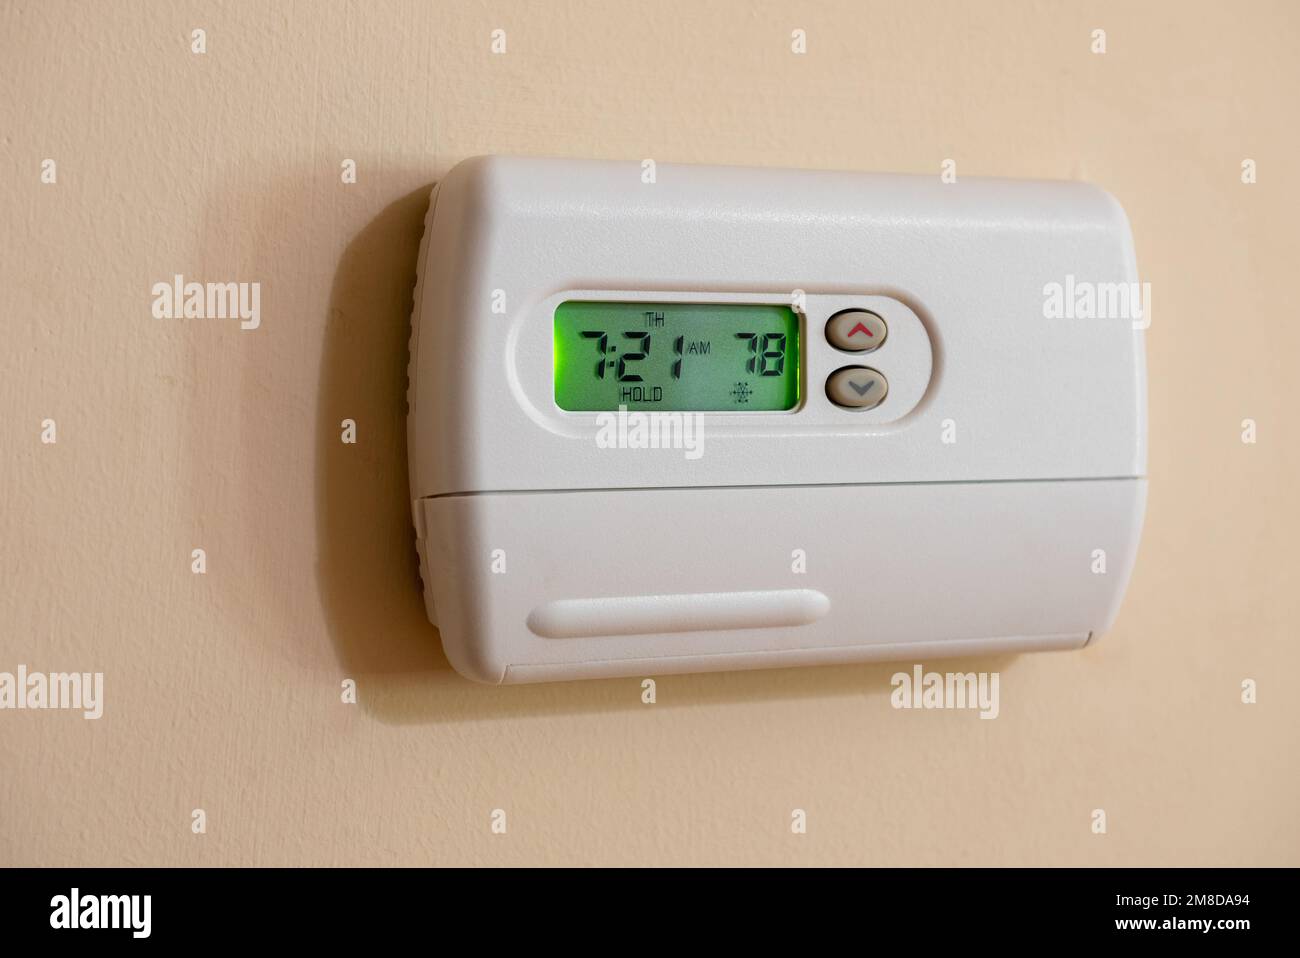 Programmable digital thermostat set to energy saving 78 degrees. Wall mounted temperature controller for home air conditioning and heating system. Stock Photo